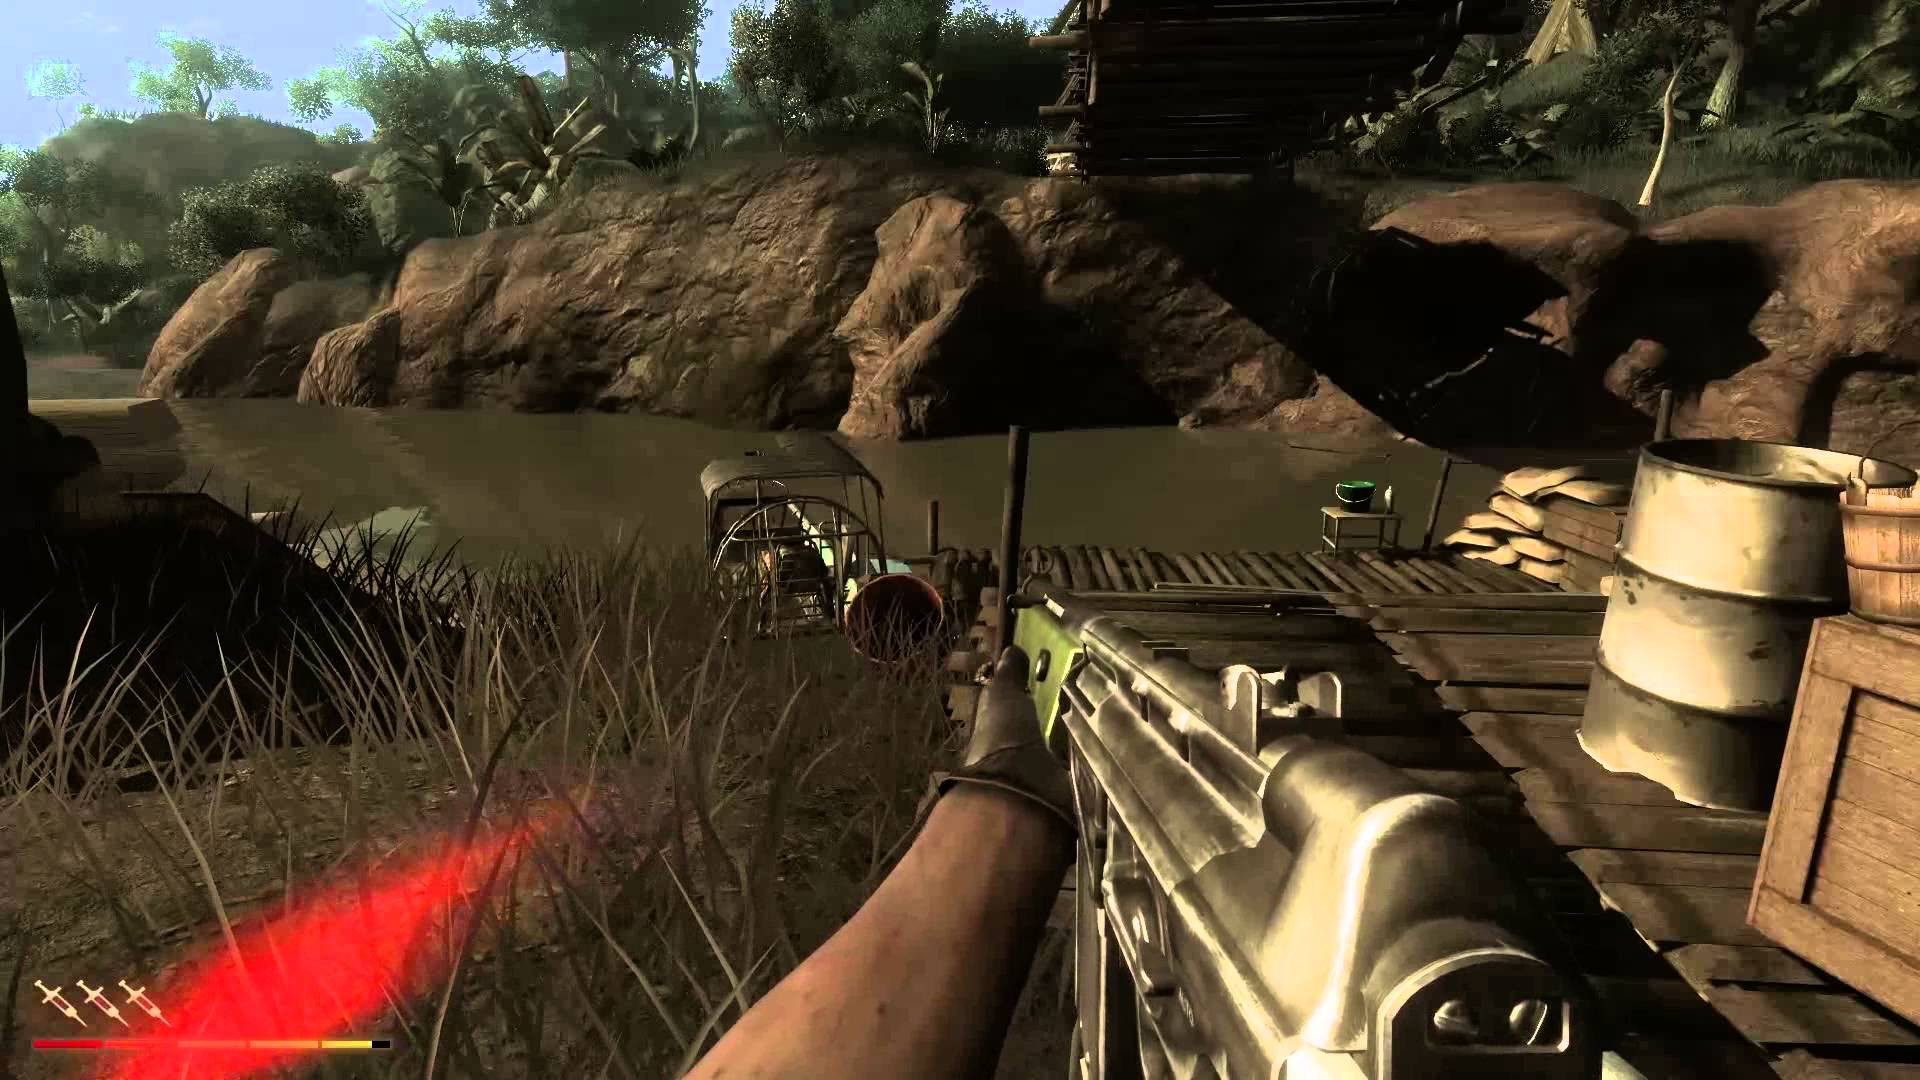 Far Cry 2: Fortune's Edition